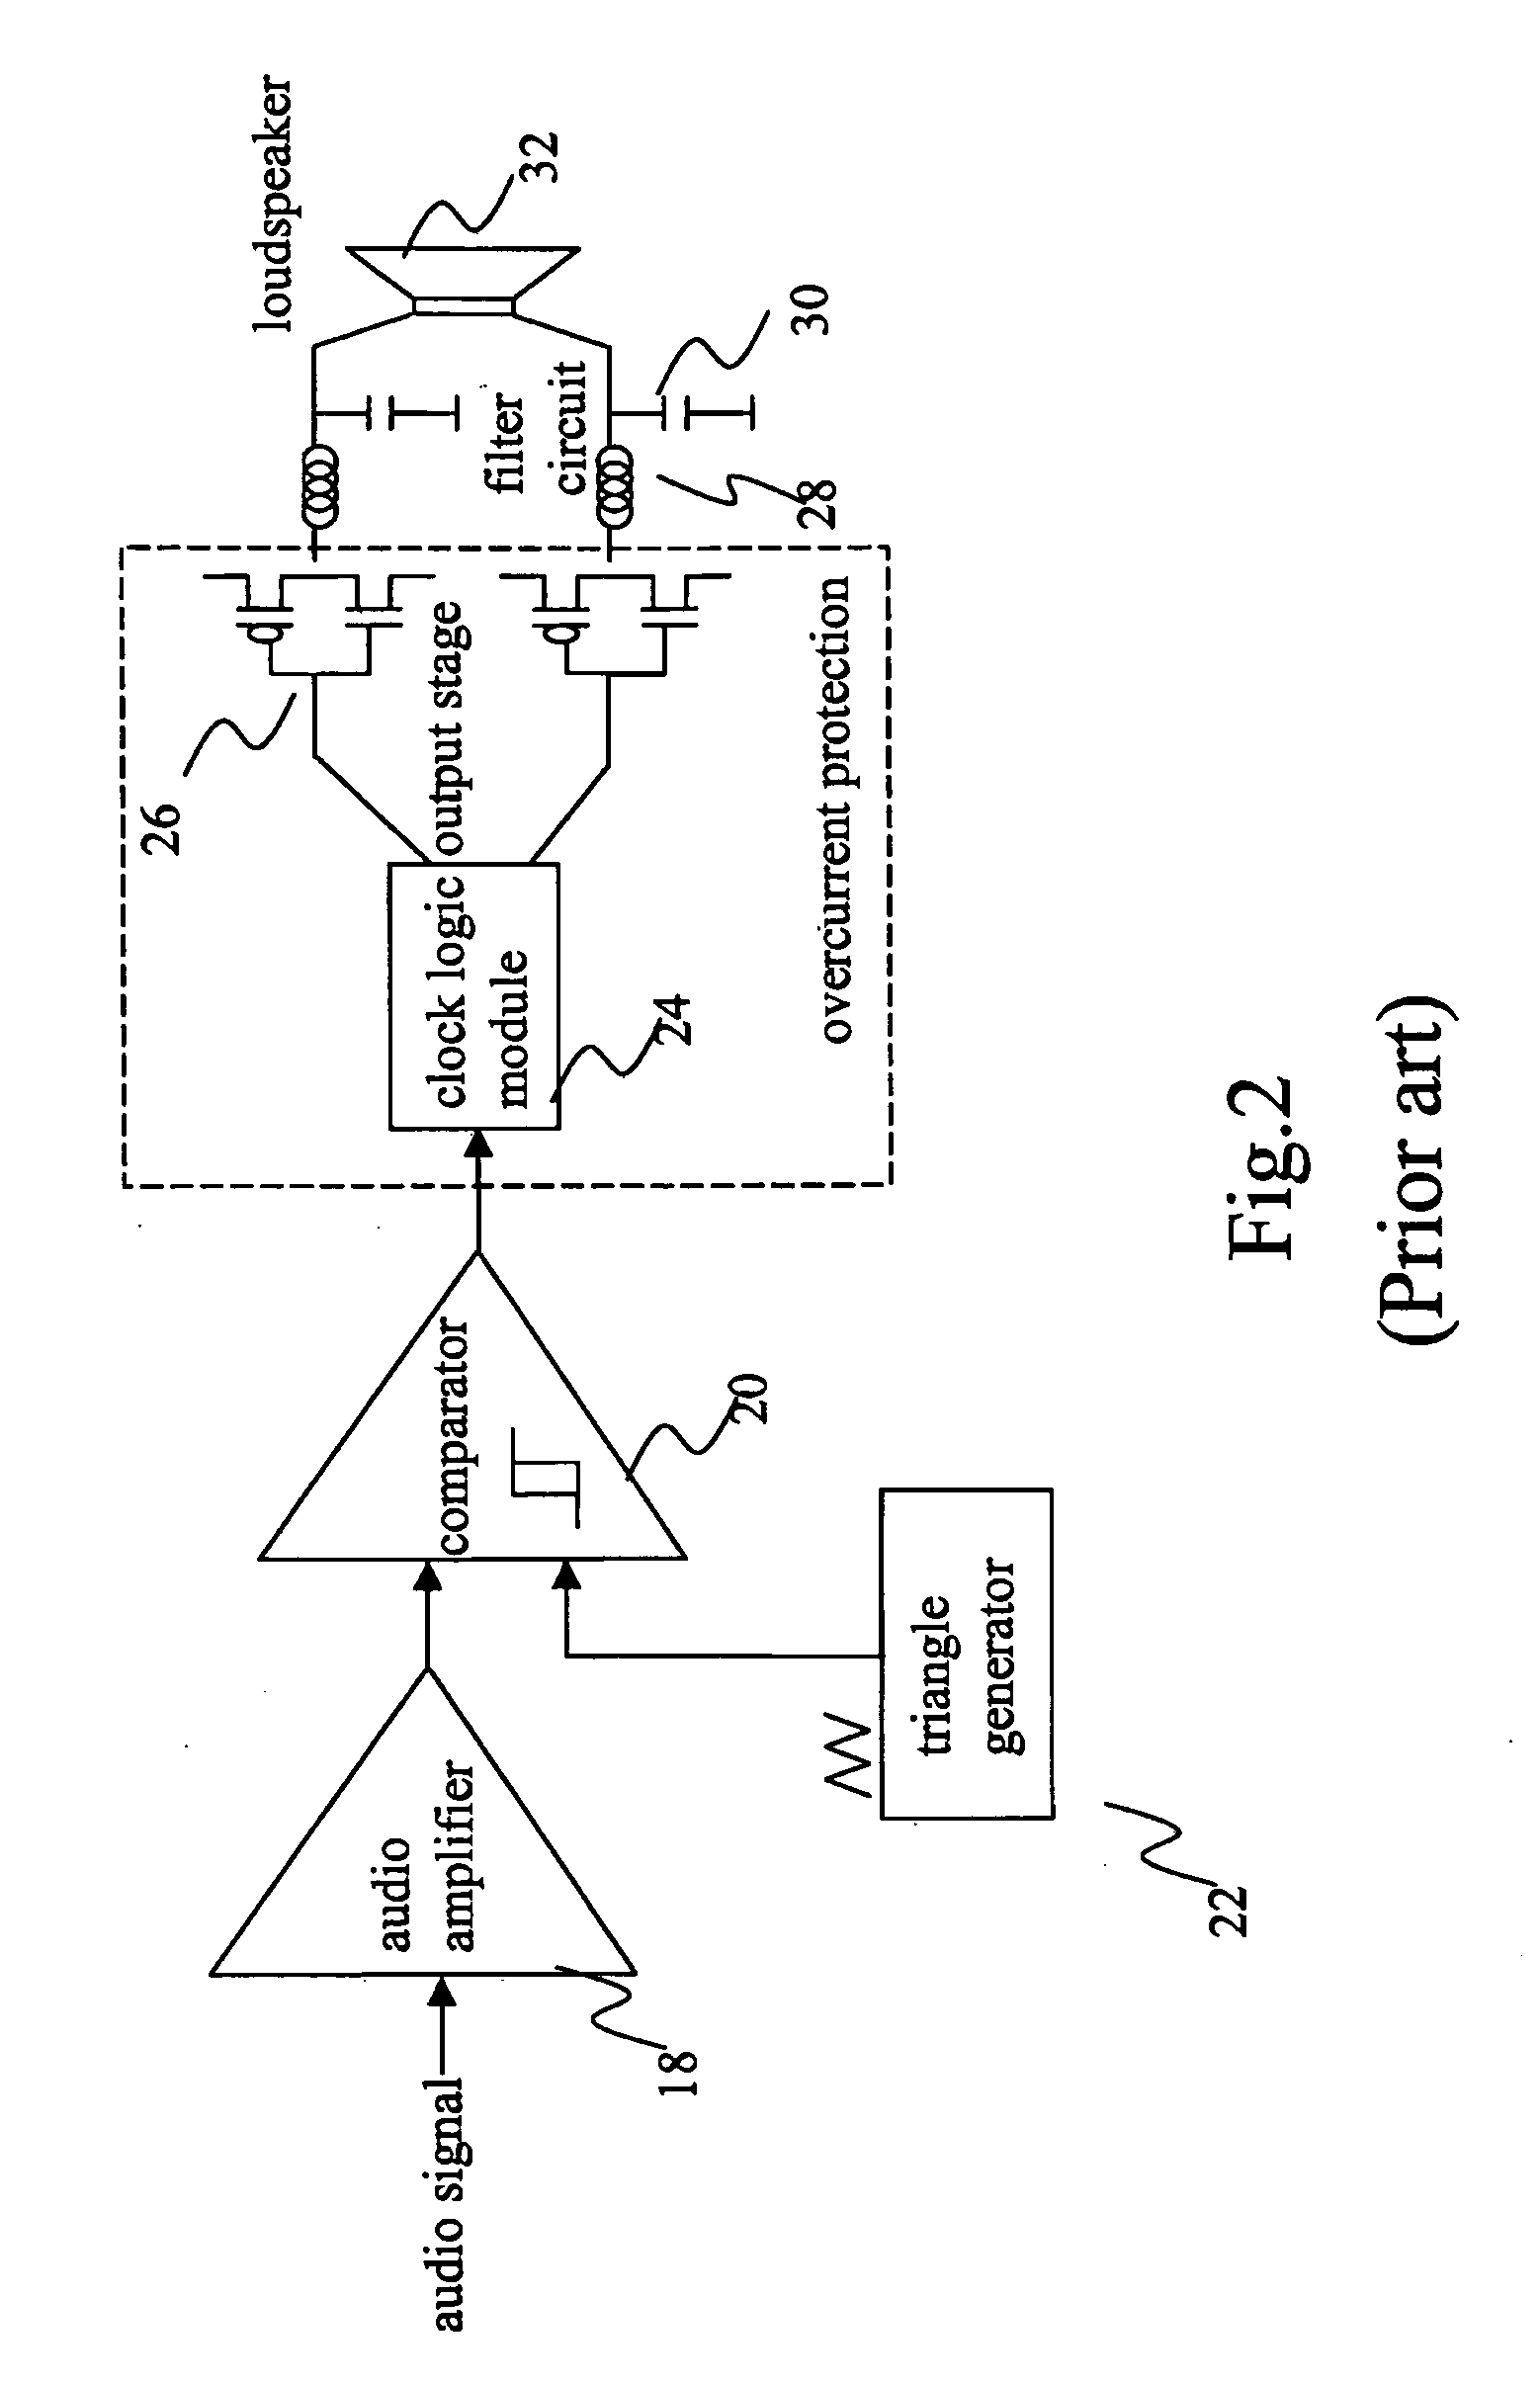 Voltage detection type overcurrent protection device for class-d amplifier